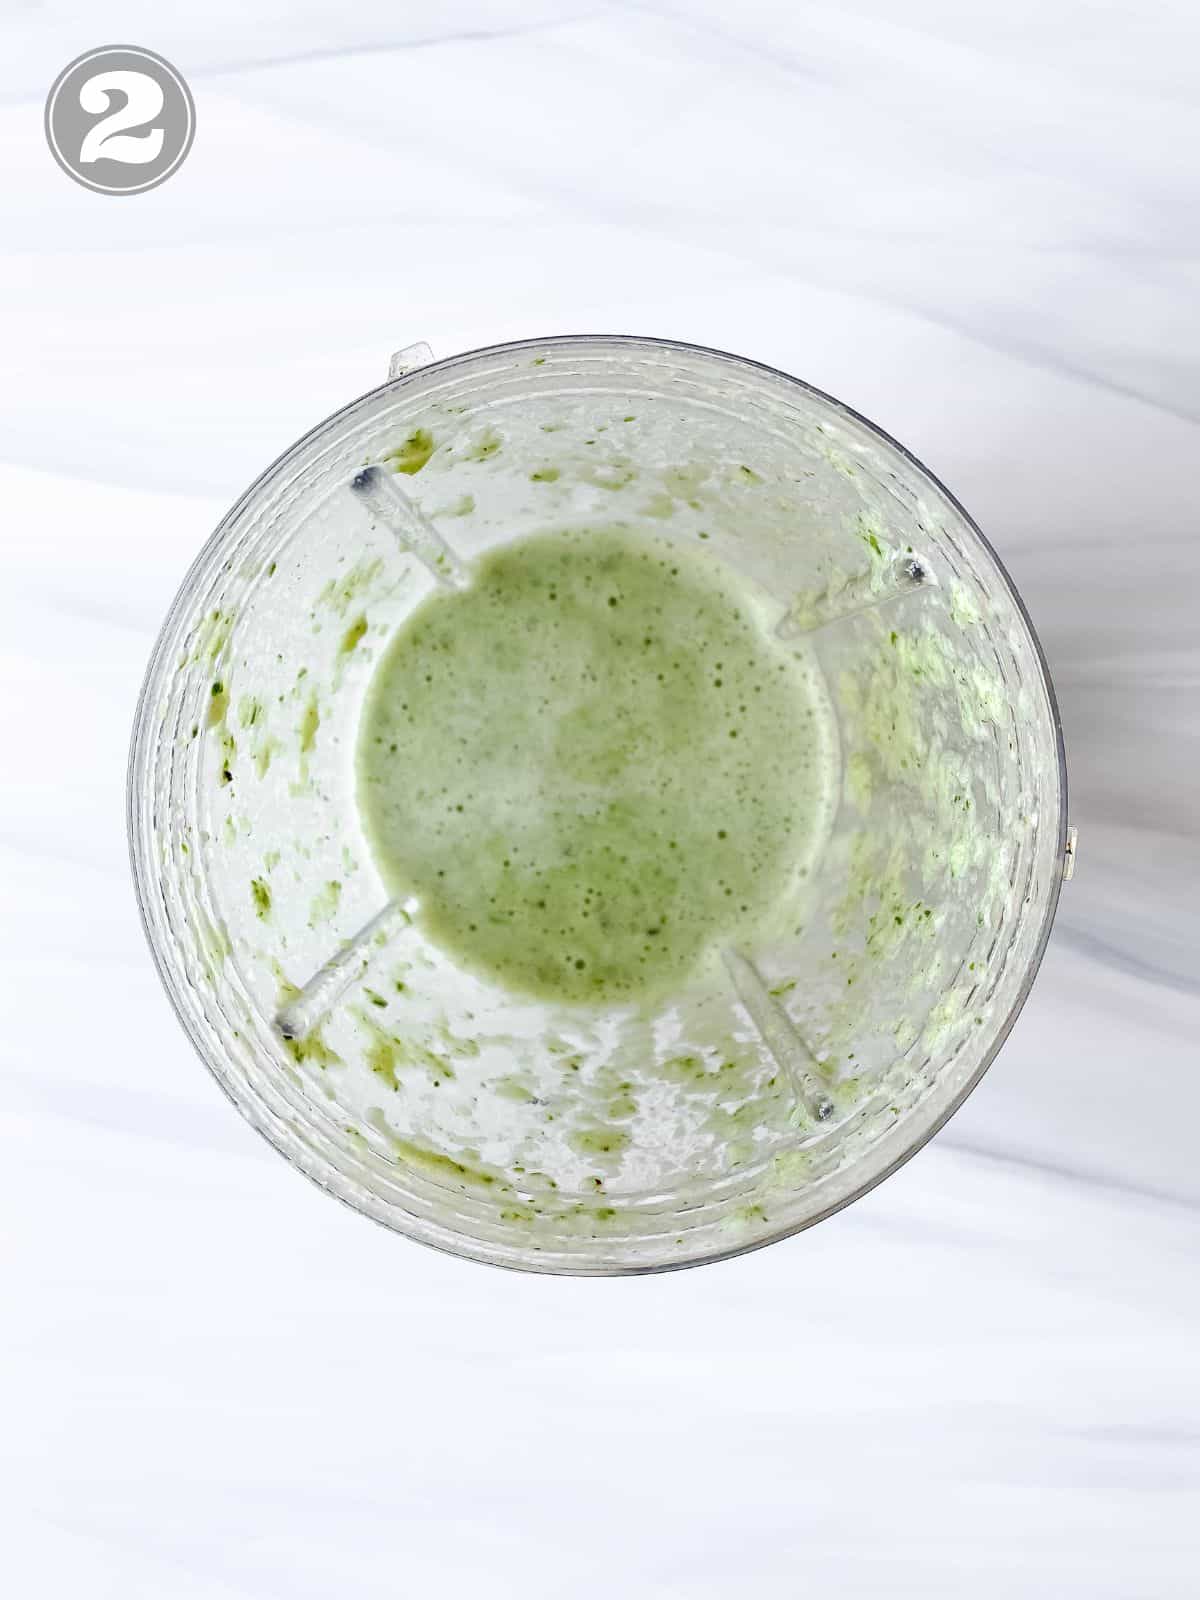 celery cucumber smoothie in a blender cup.